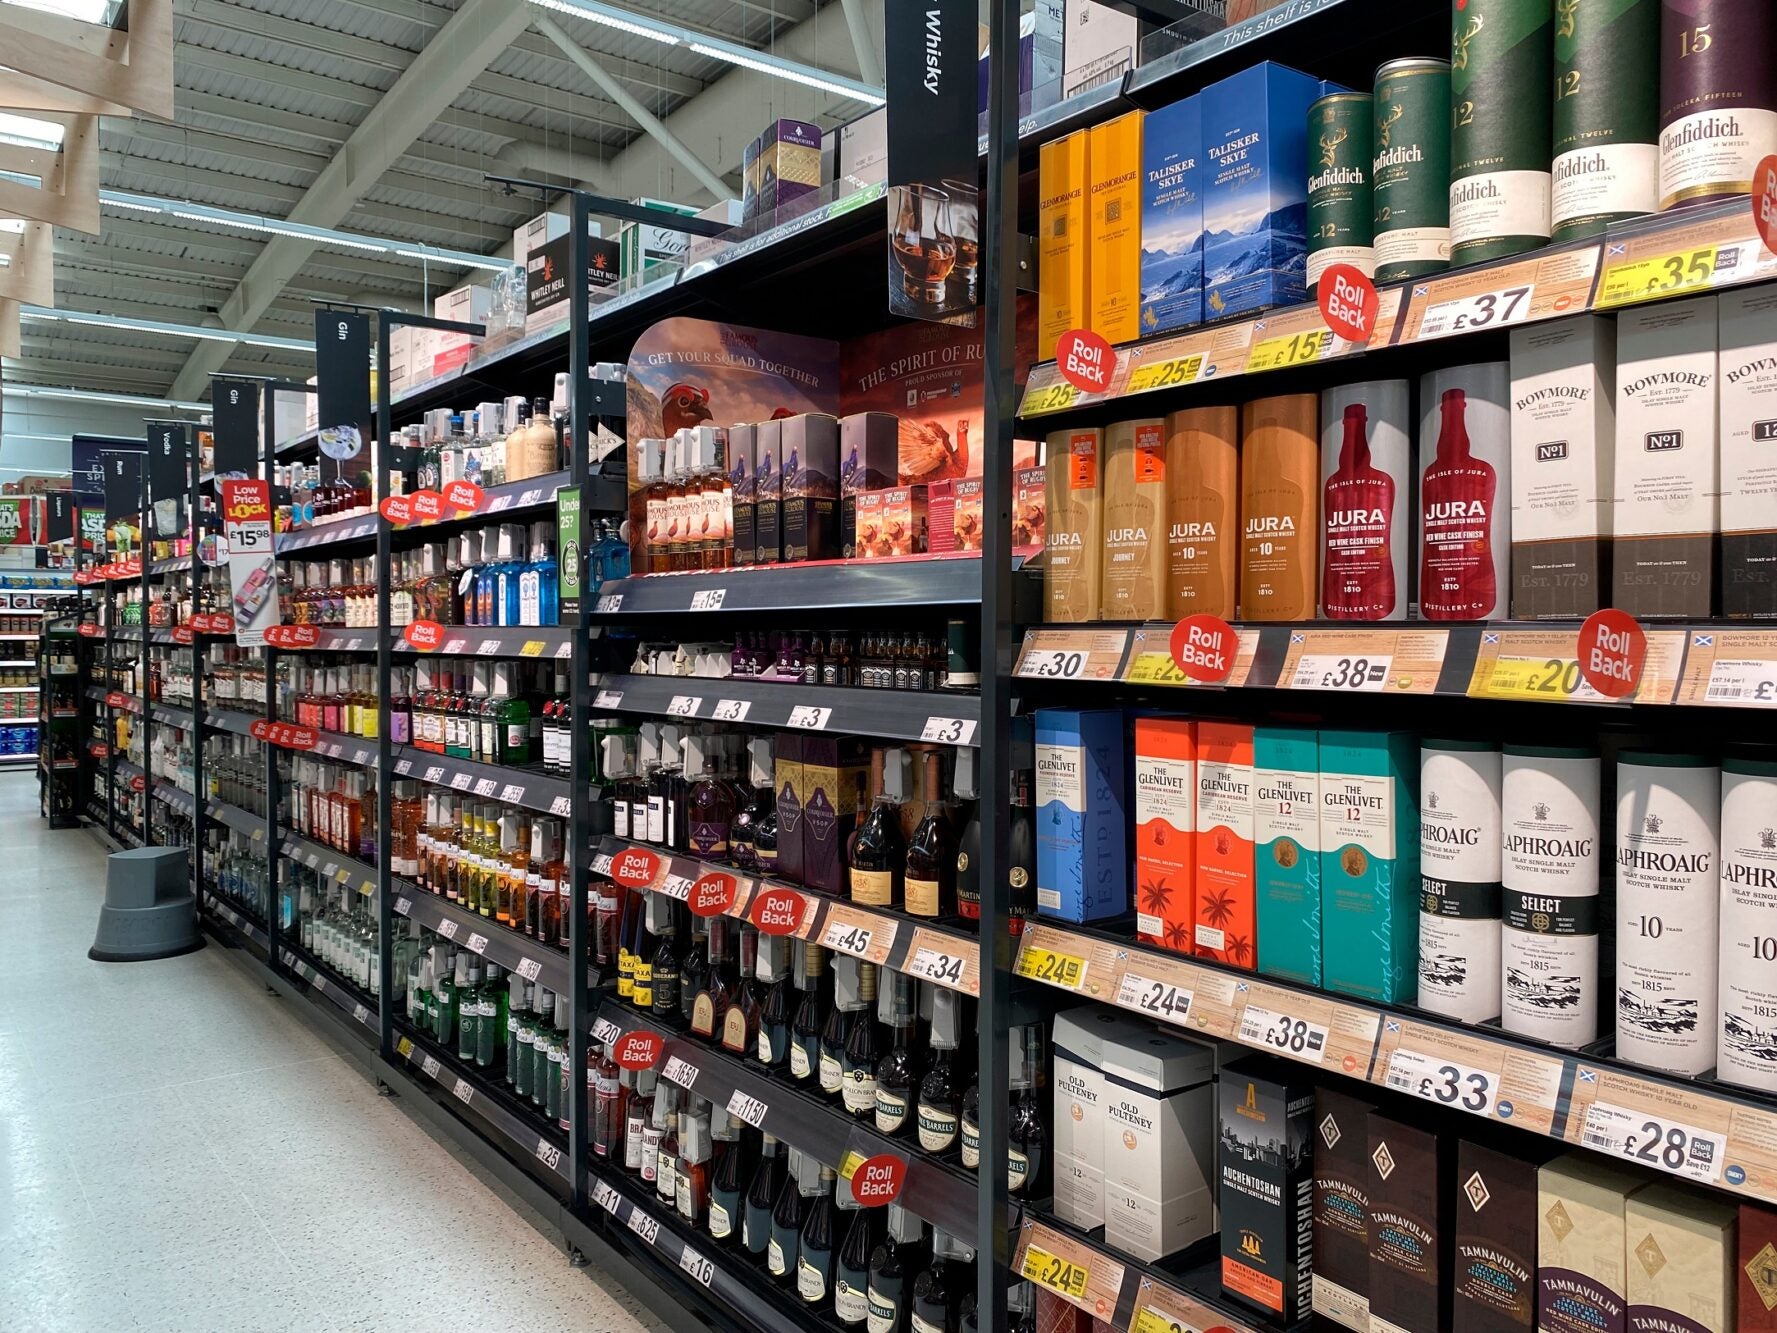 Whisk(e)y price rises yet to keep pace with inflation – exclusive data